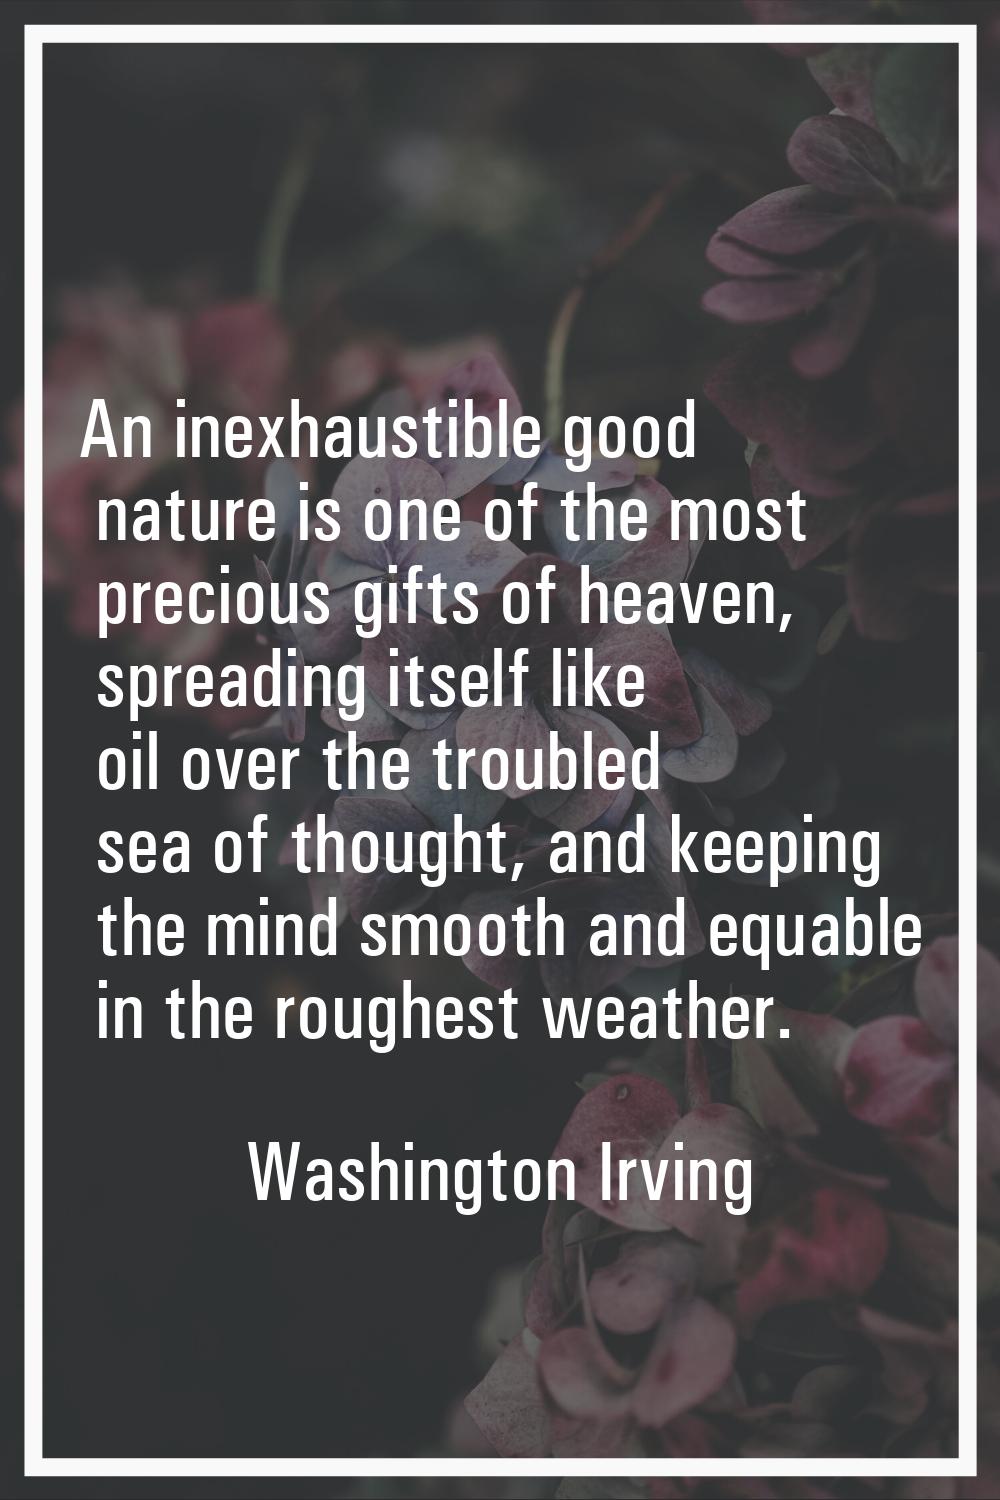 An inexhaustible good nature is one of the most precious gifts of heaven, spreading itself like oil